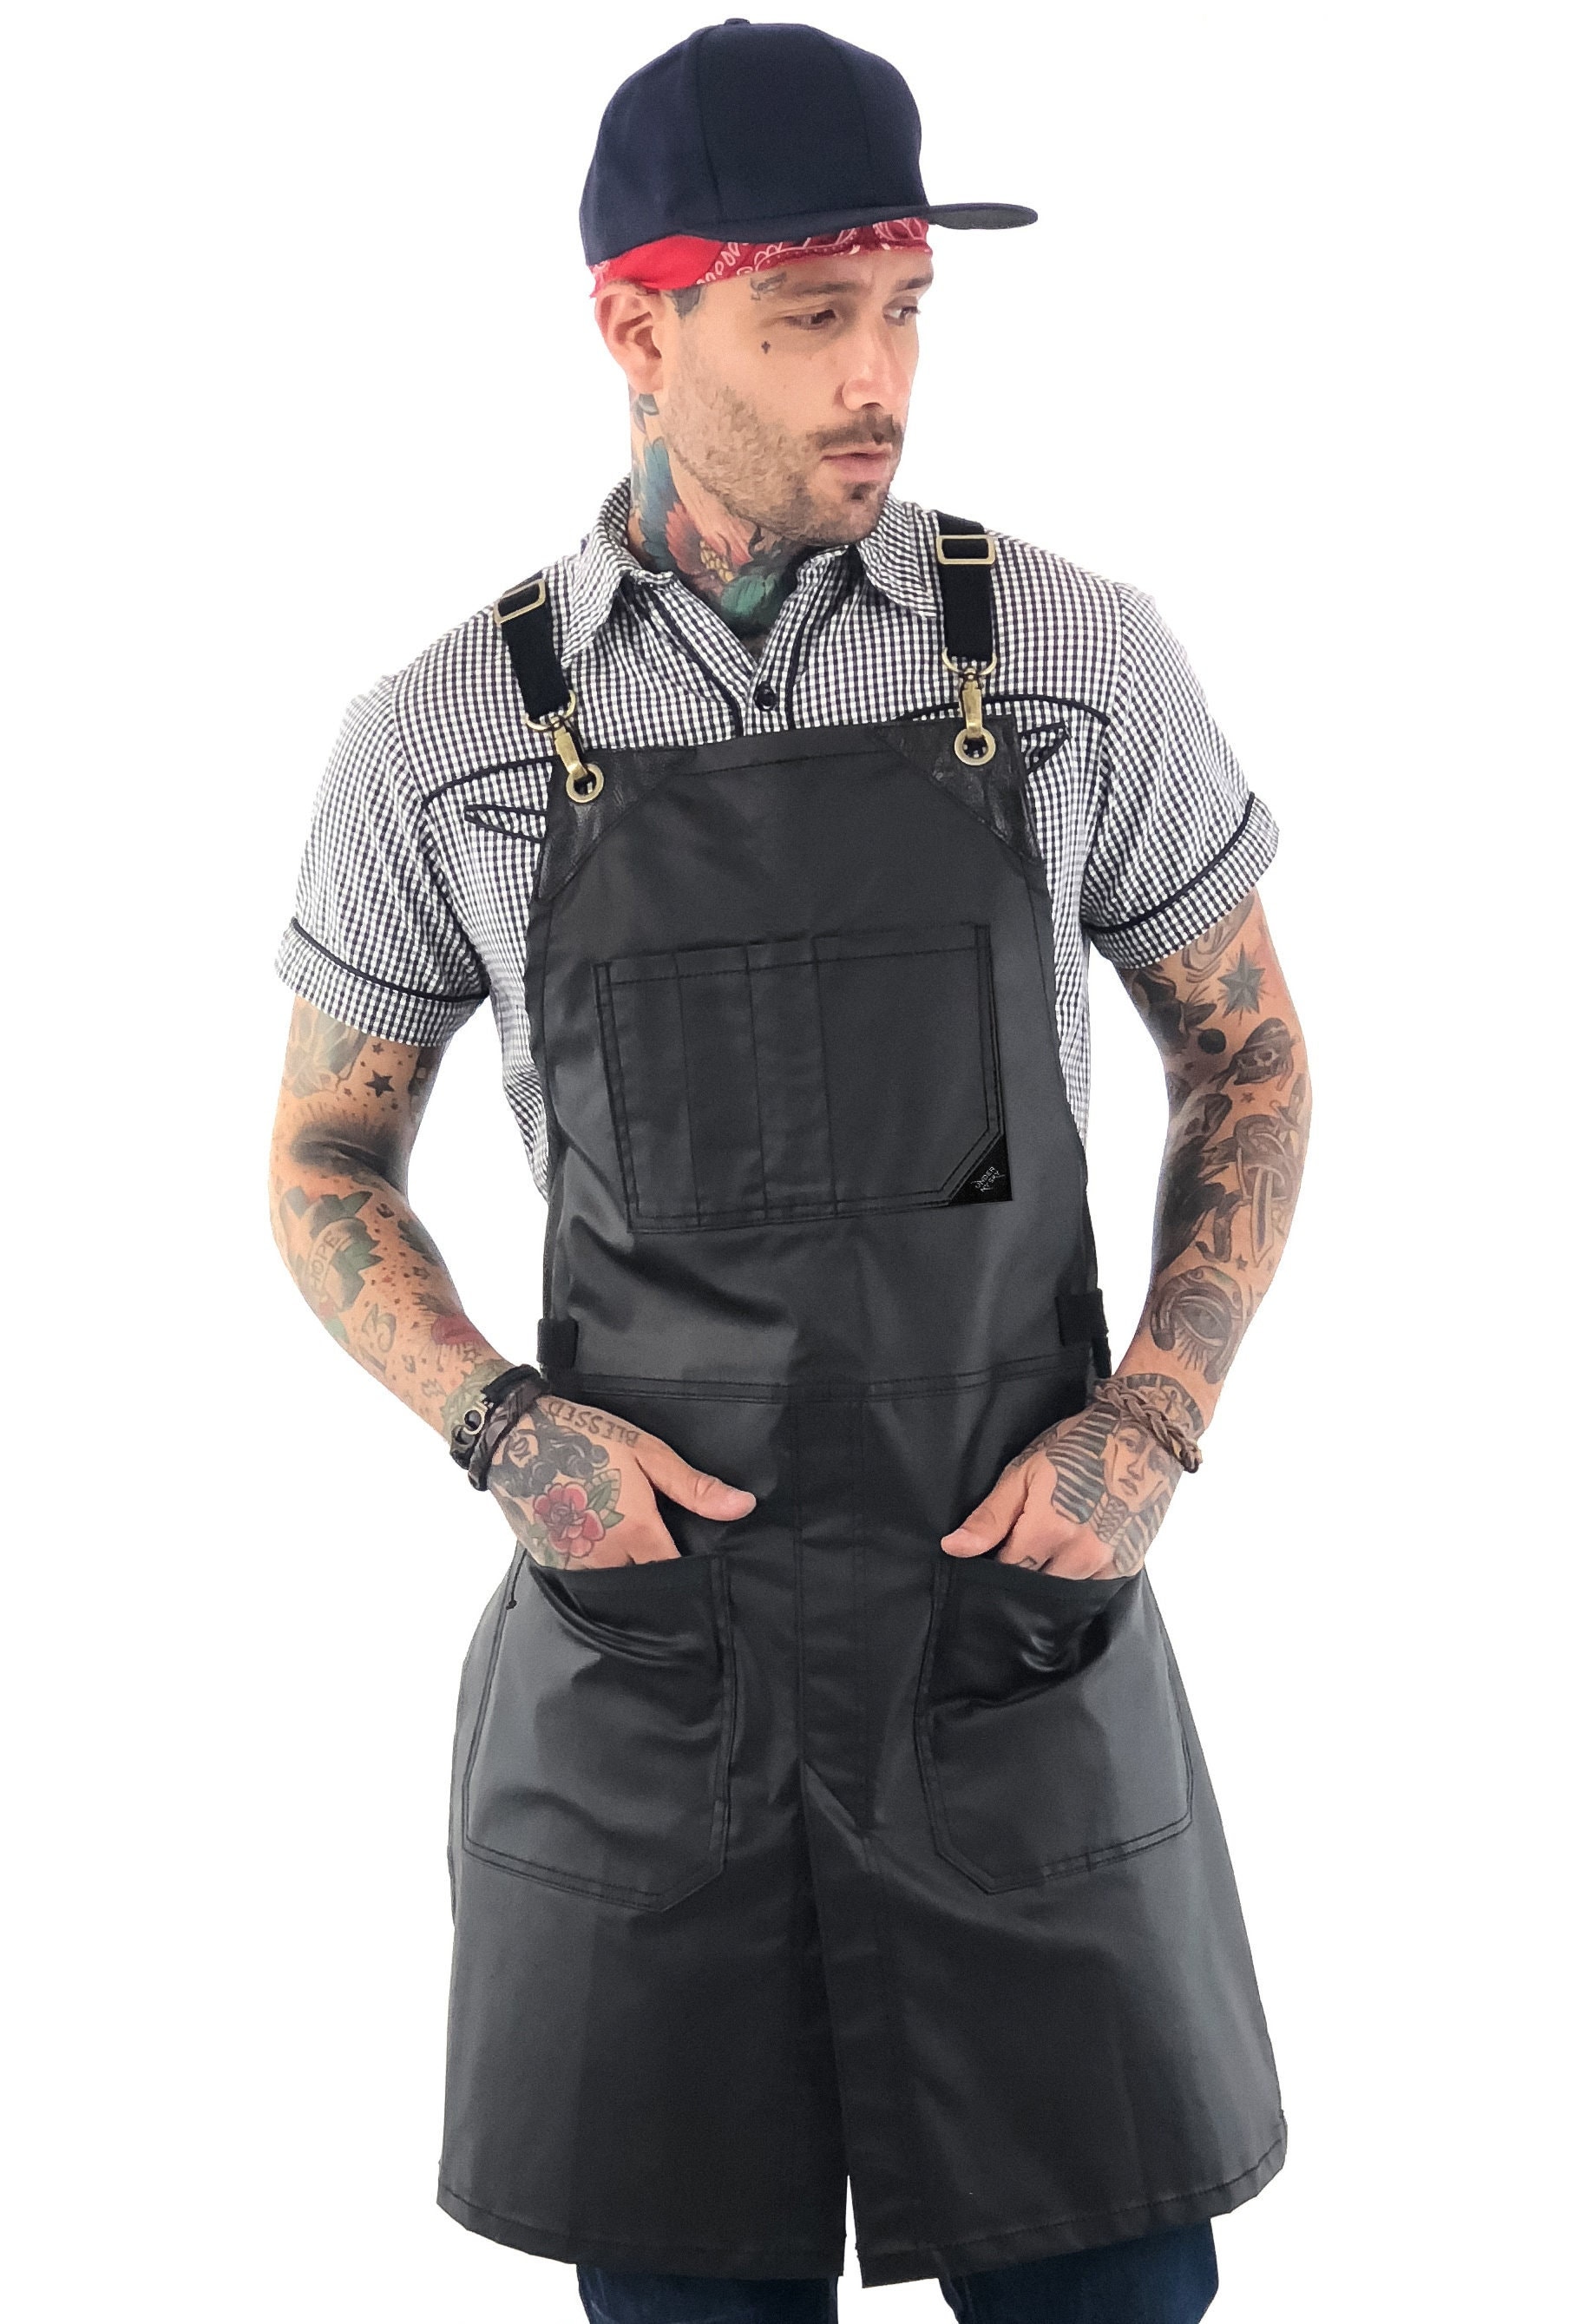 Buy Coated Apron Cross-back, Black or Brown Twill Gold, Chrome or